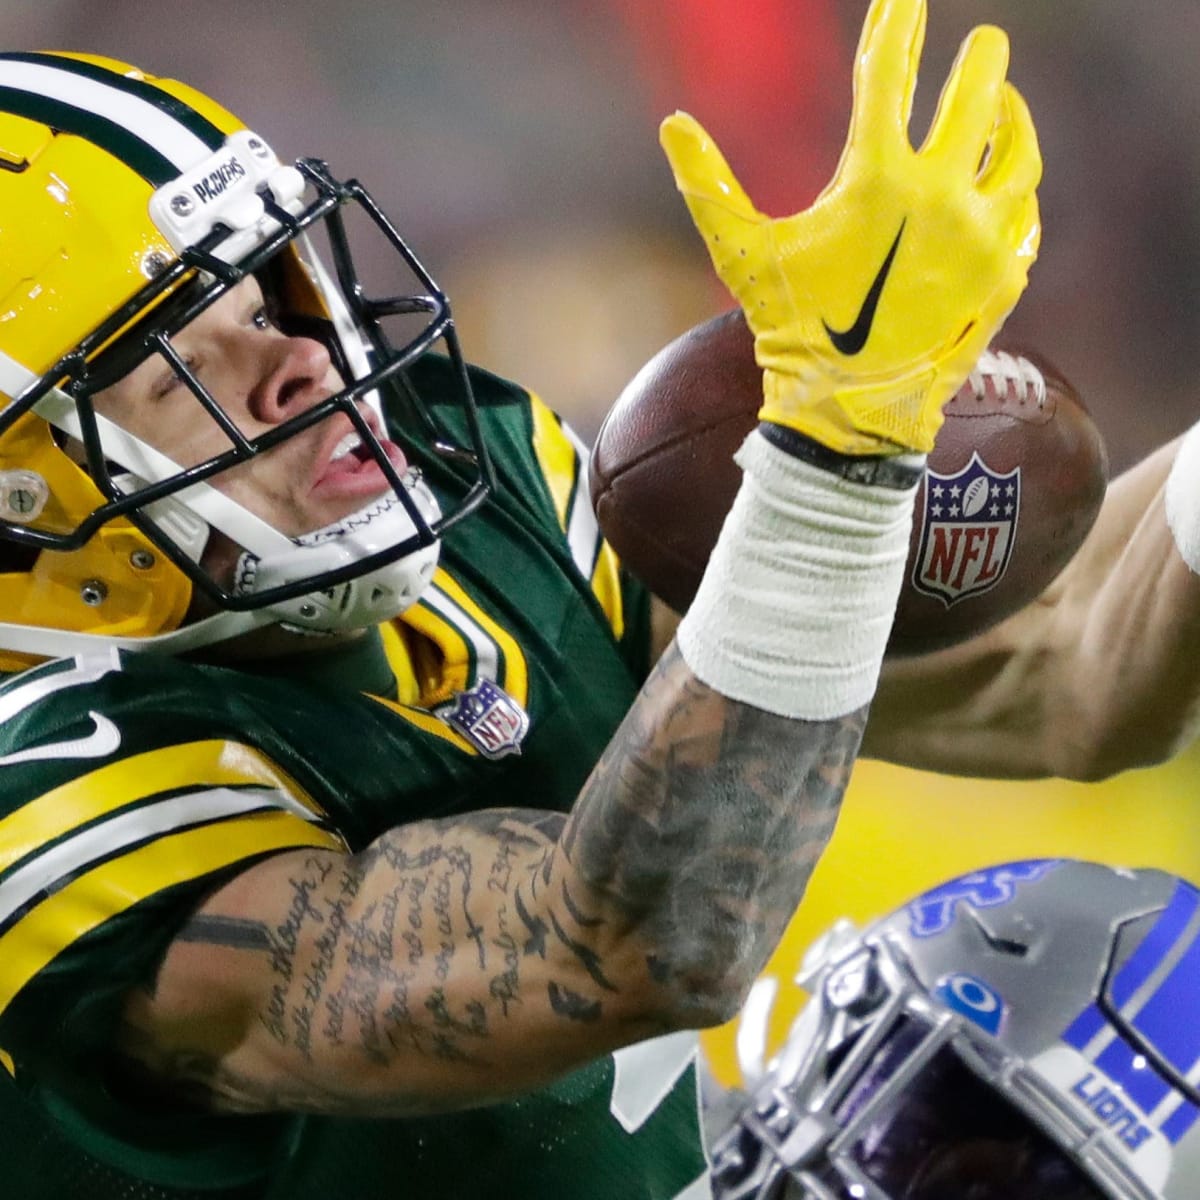 Packers sign Christian Watson to rookie contract, finalizing 2022 NFL Draft  class - Acme Packing Company